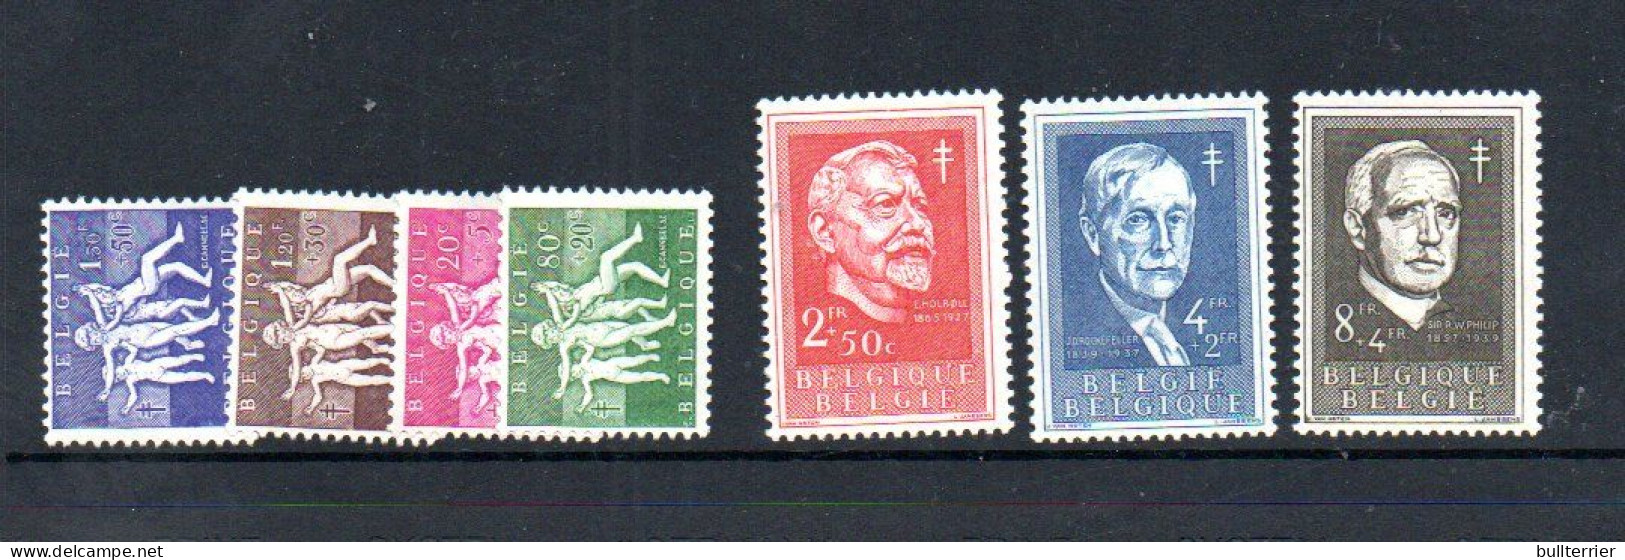 BELGIUM - 1955  - ANTB FUNDS SET OF 7  MINT NEVER HINGED , SG CAT £90+ - Unused Stamps